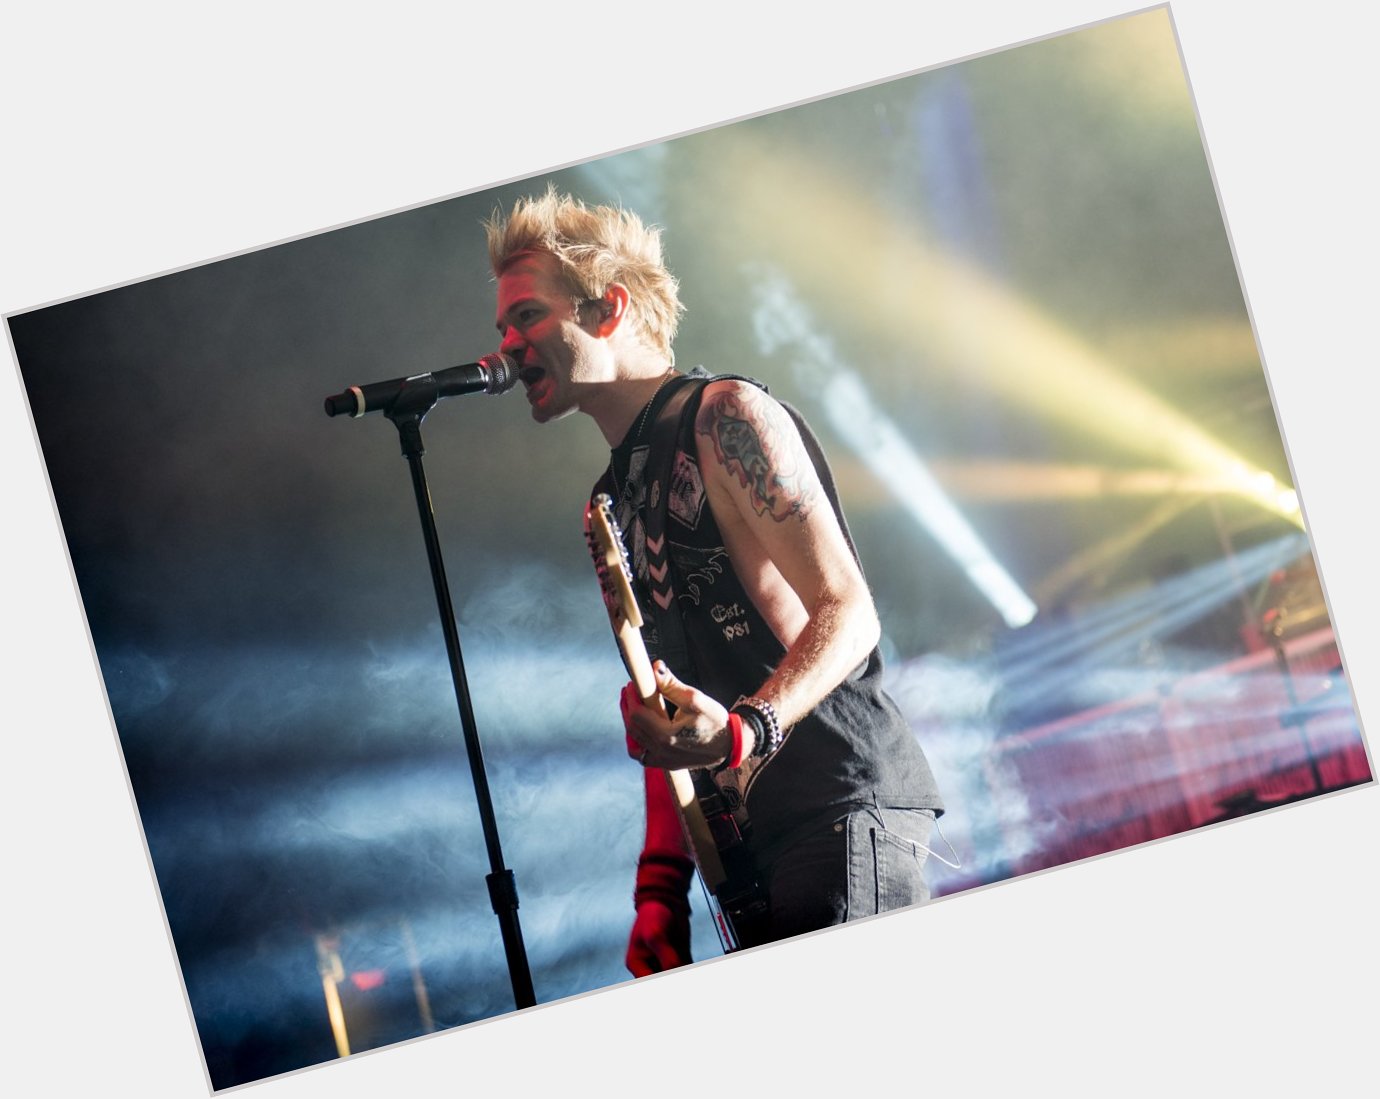 Happy birthday to Deryck Whibley of  Thanks for giving us an awesome show earlier this month!  